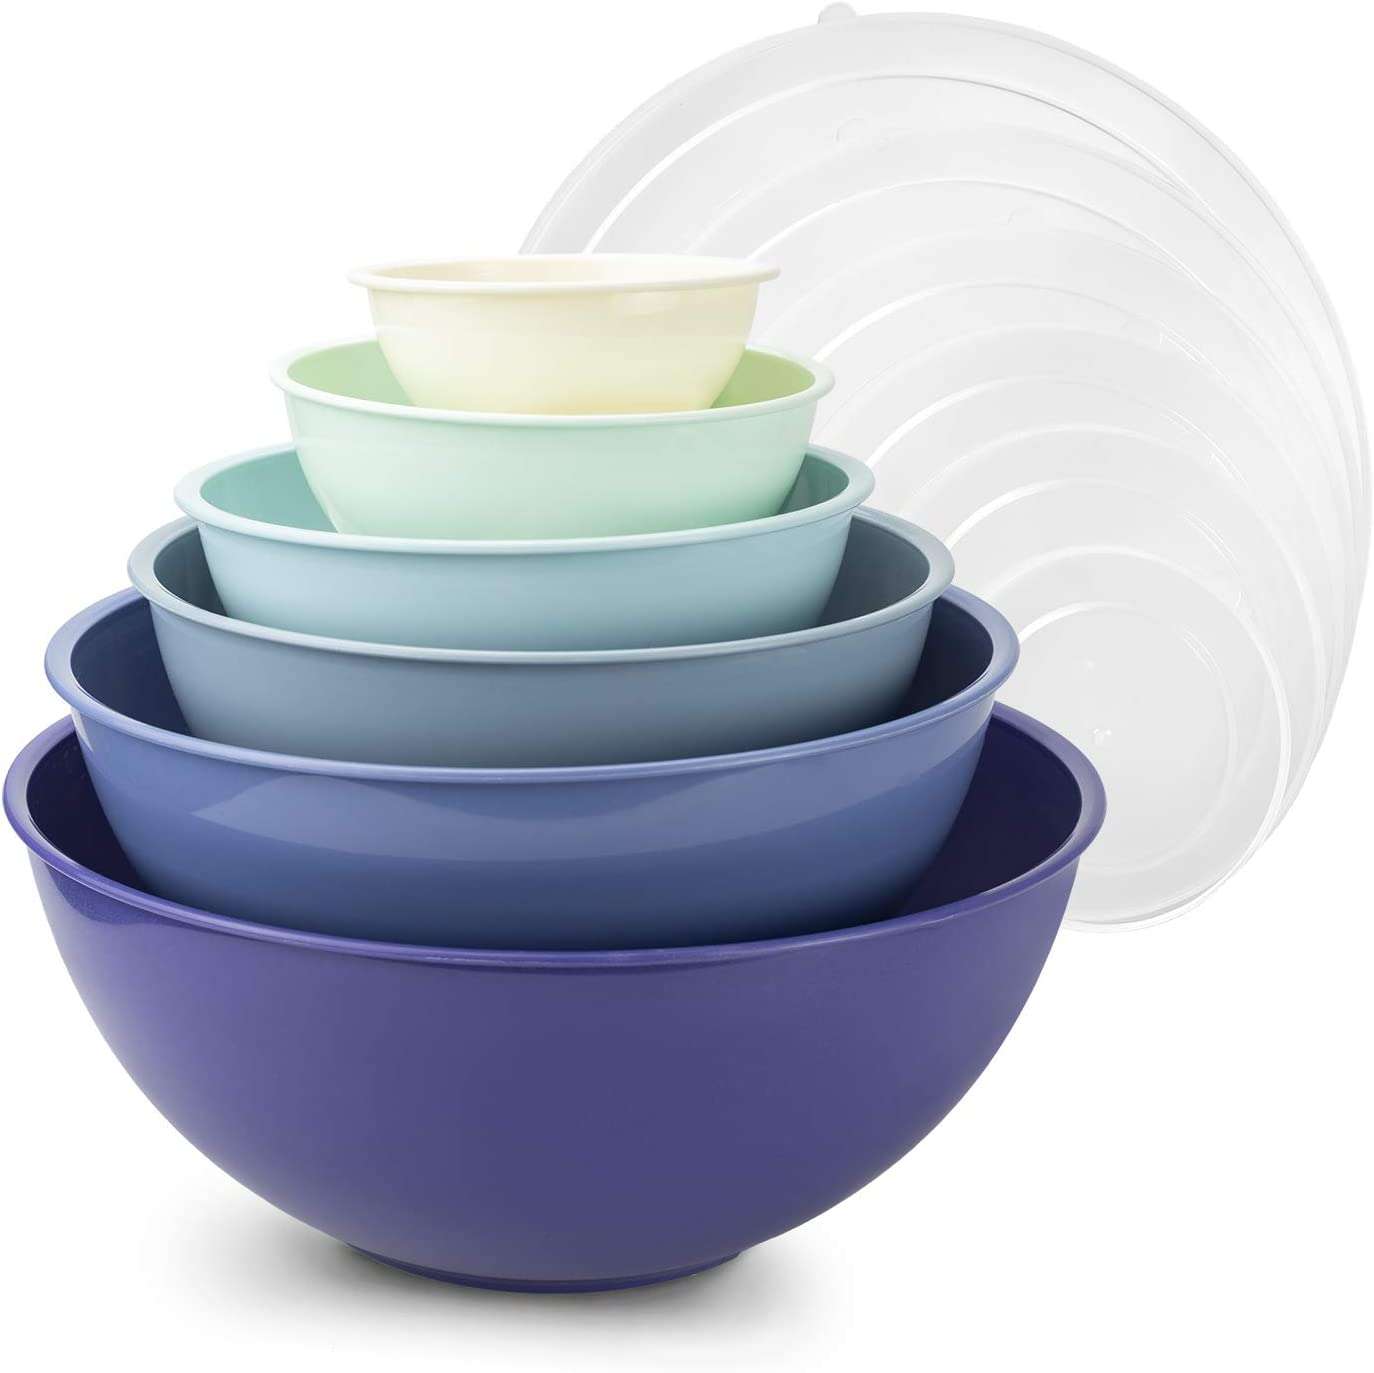 Cook With Color Mixing Bowls